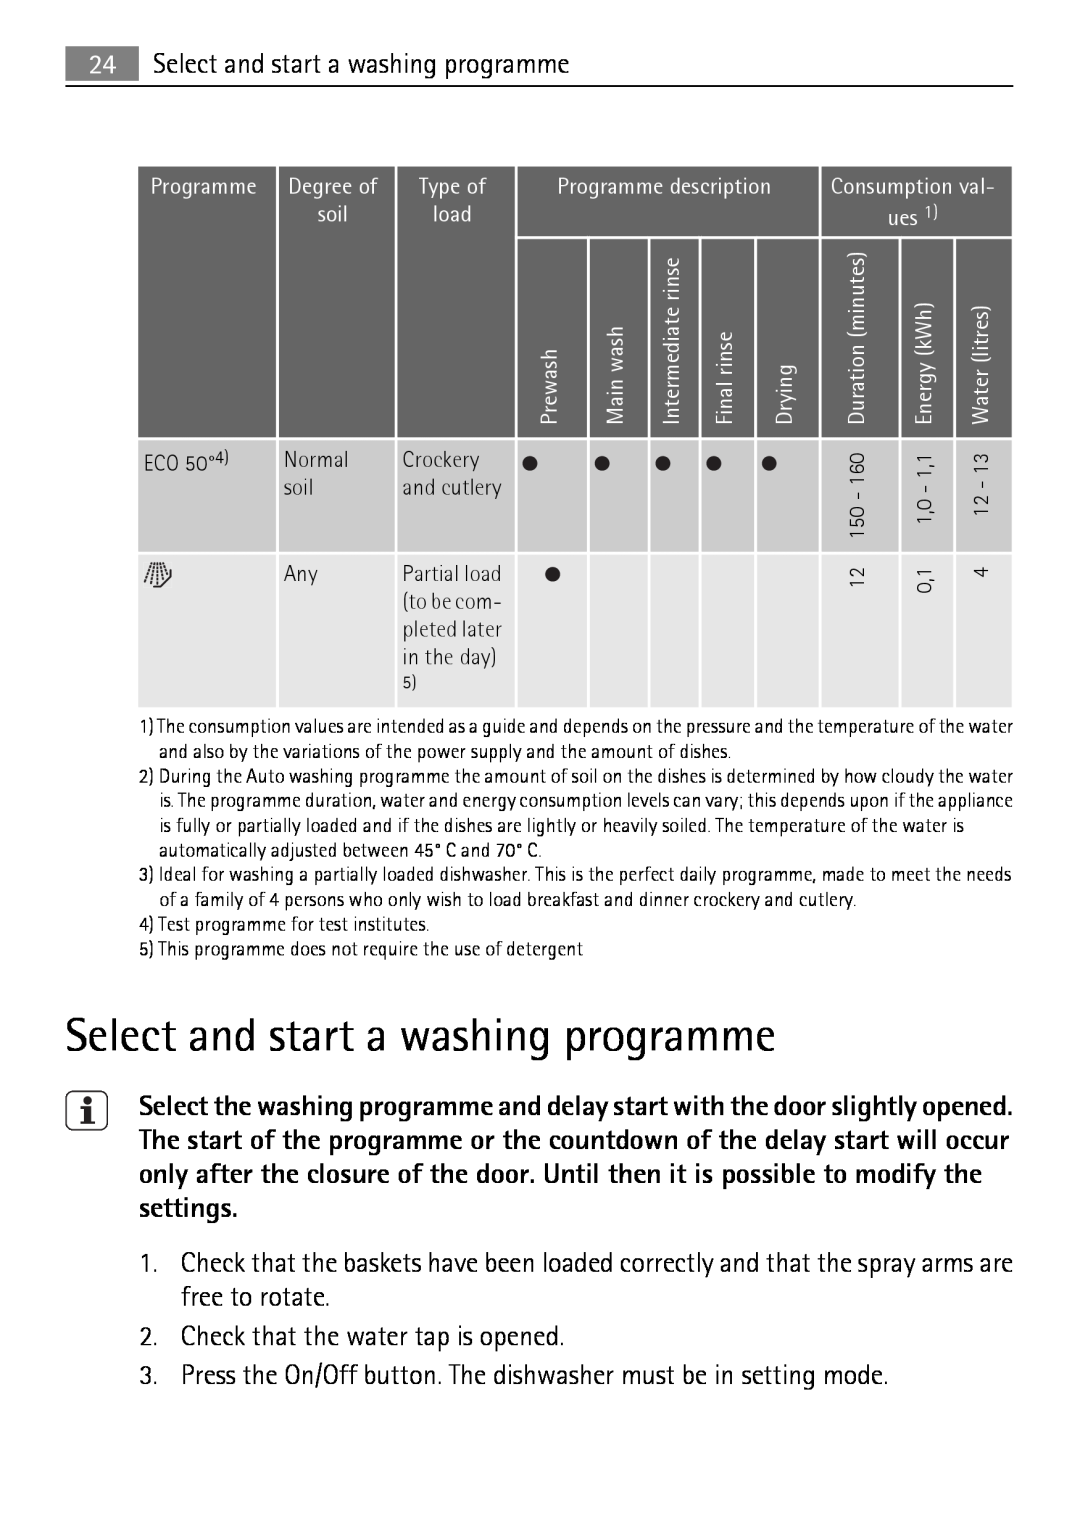 Electrolux 65011 VI user manual Select and start a washing programme, Check that the water tap is opened 